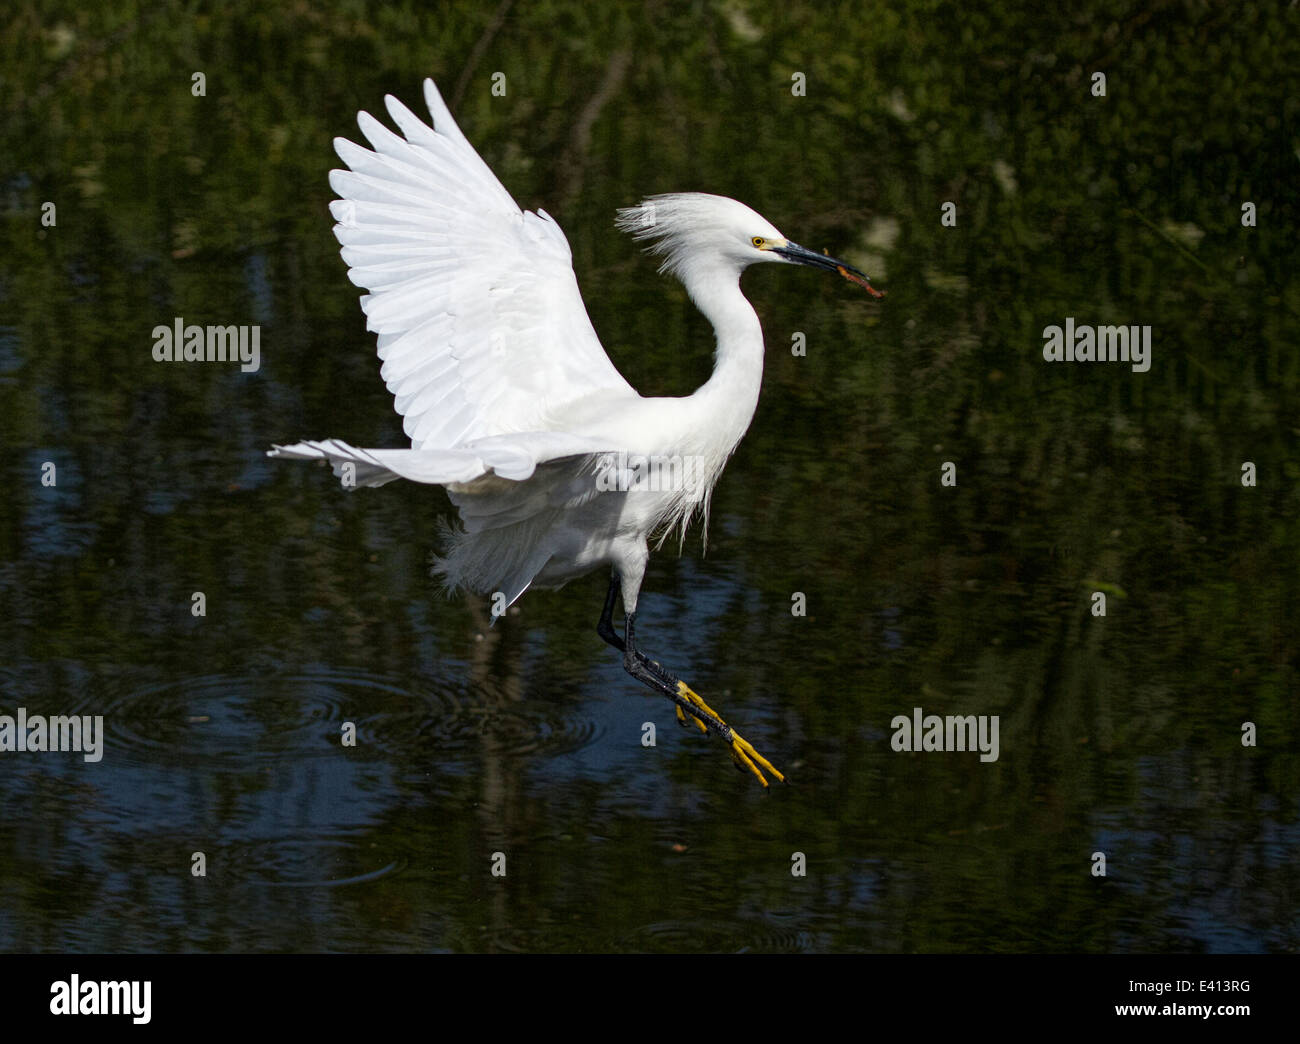 Snowy Egret (Egretta thula)in flight with nesting material Stock Photo